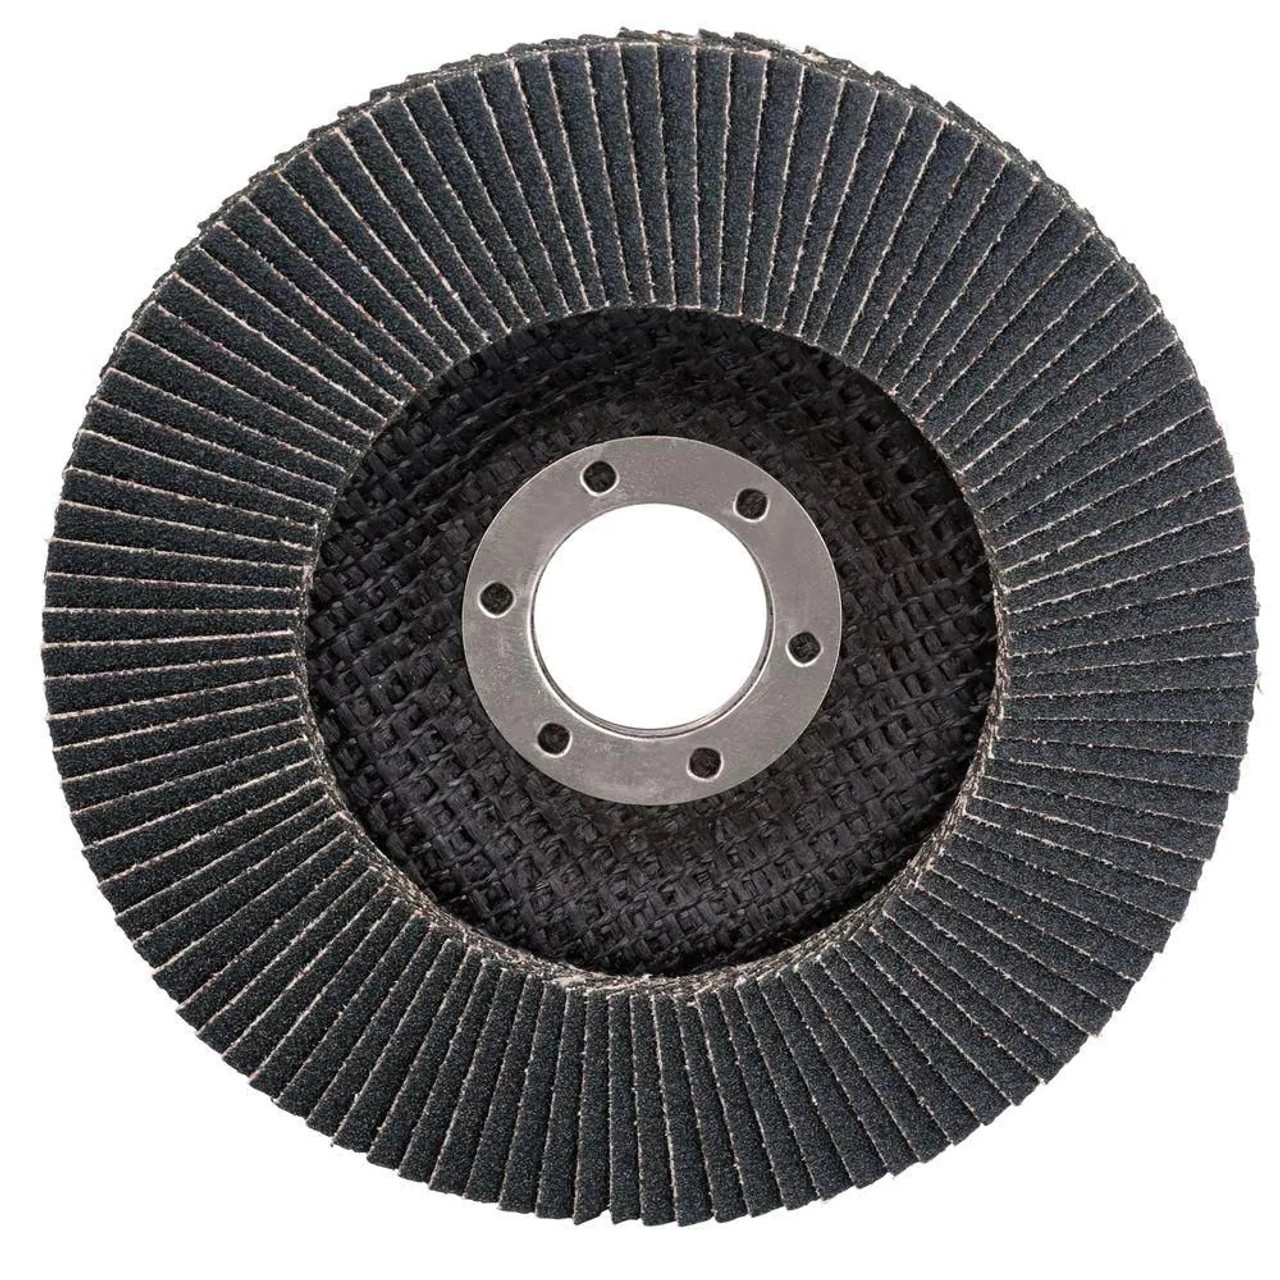 Freud FRE-CDXXXXXXXN01F Steel Demon 1/2-inch Type 29 Grinder Flap Disc  for Metal Grinding/Polishing Atlas-Machinery